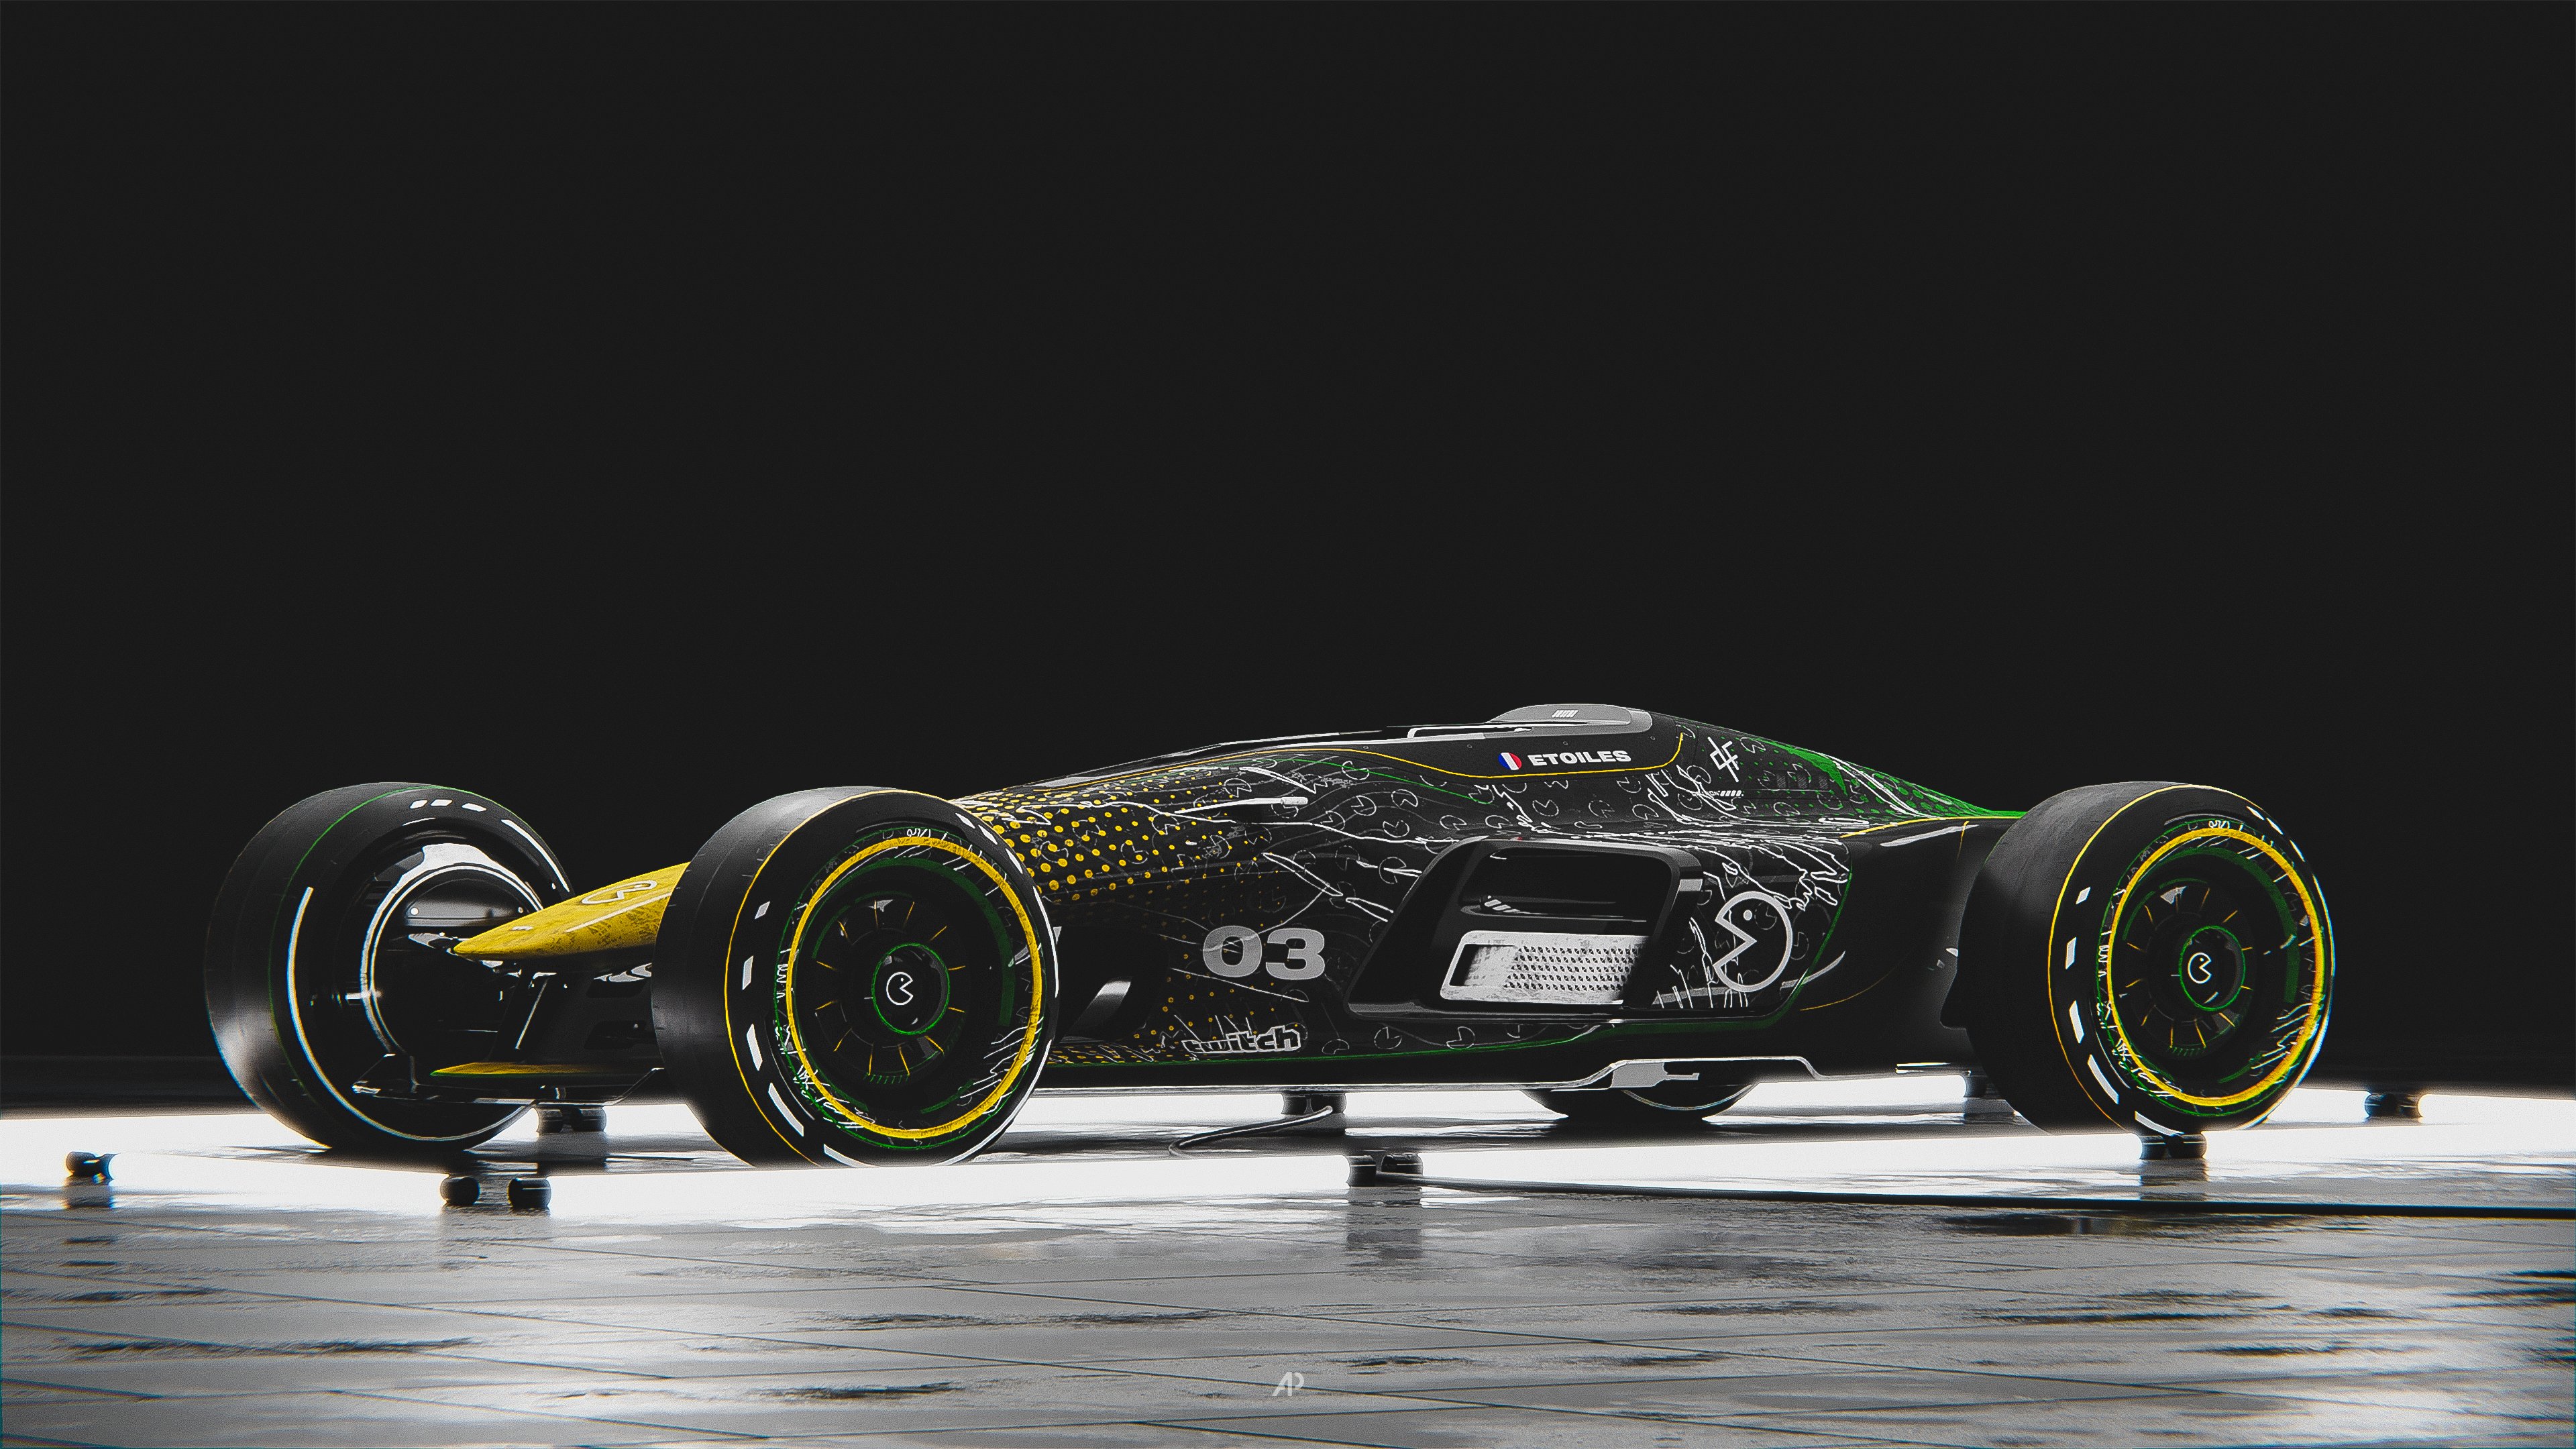 Etoiles 2022 skin used during of the ZrT Trackmania Cup 2022